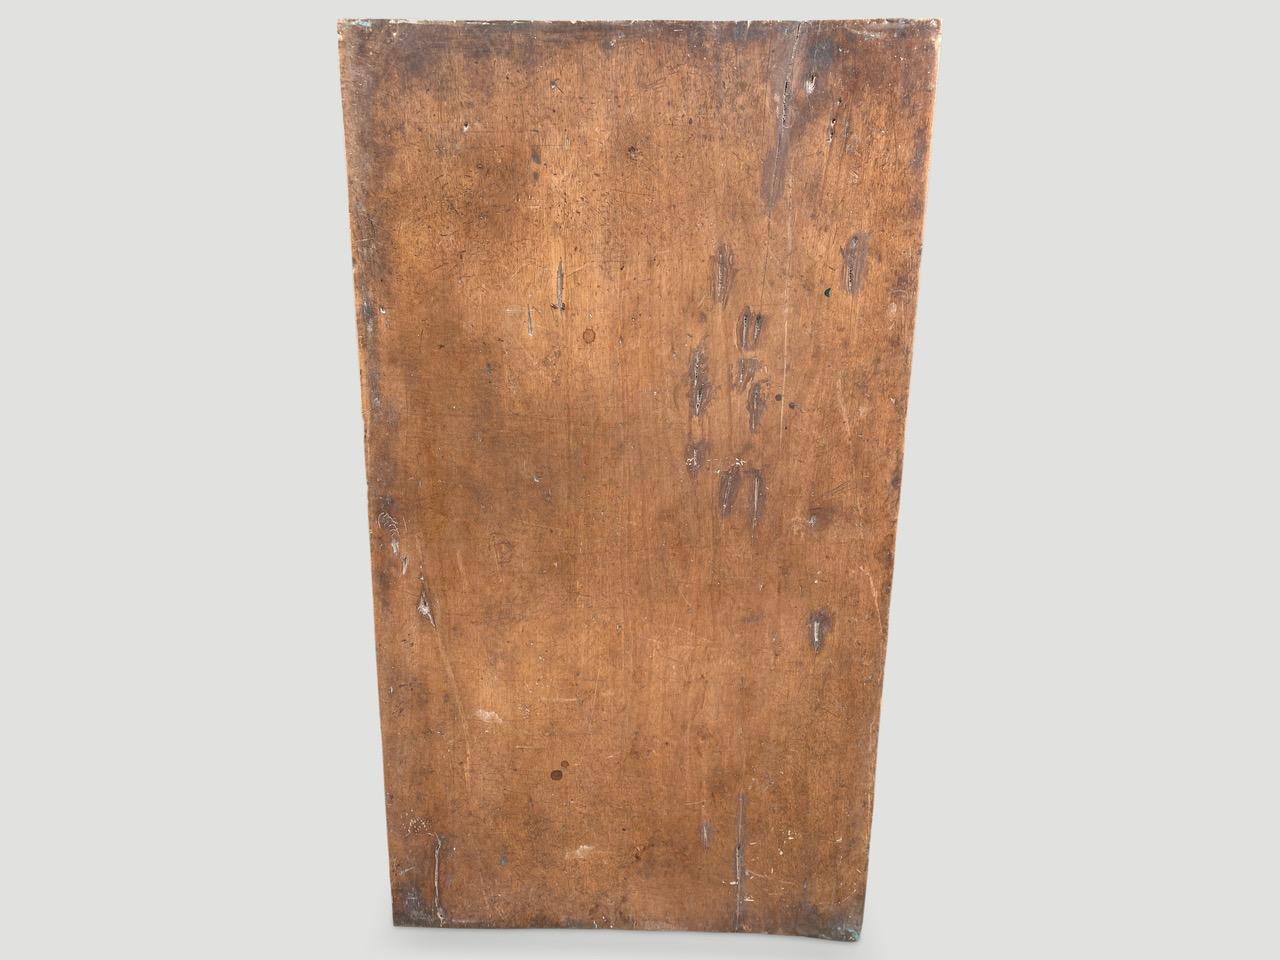 We sourced a collection of beautiful antique panels from the island of Nias. Covered in dense tropical jungle, the islands of Nias are located off the western coast of Sumatra, Indonesia. Strong currents and rough seas have isolated the islands and